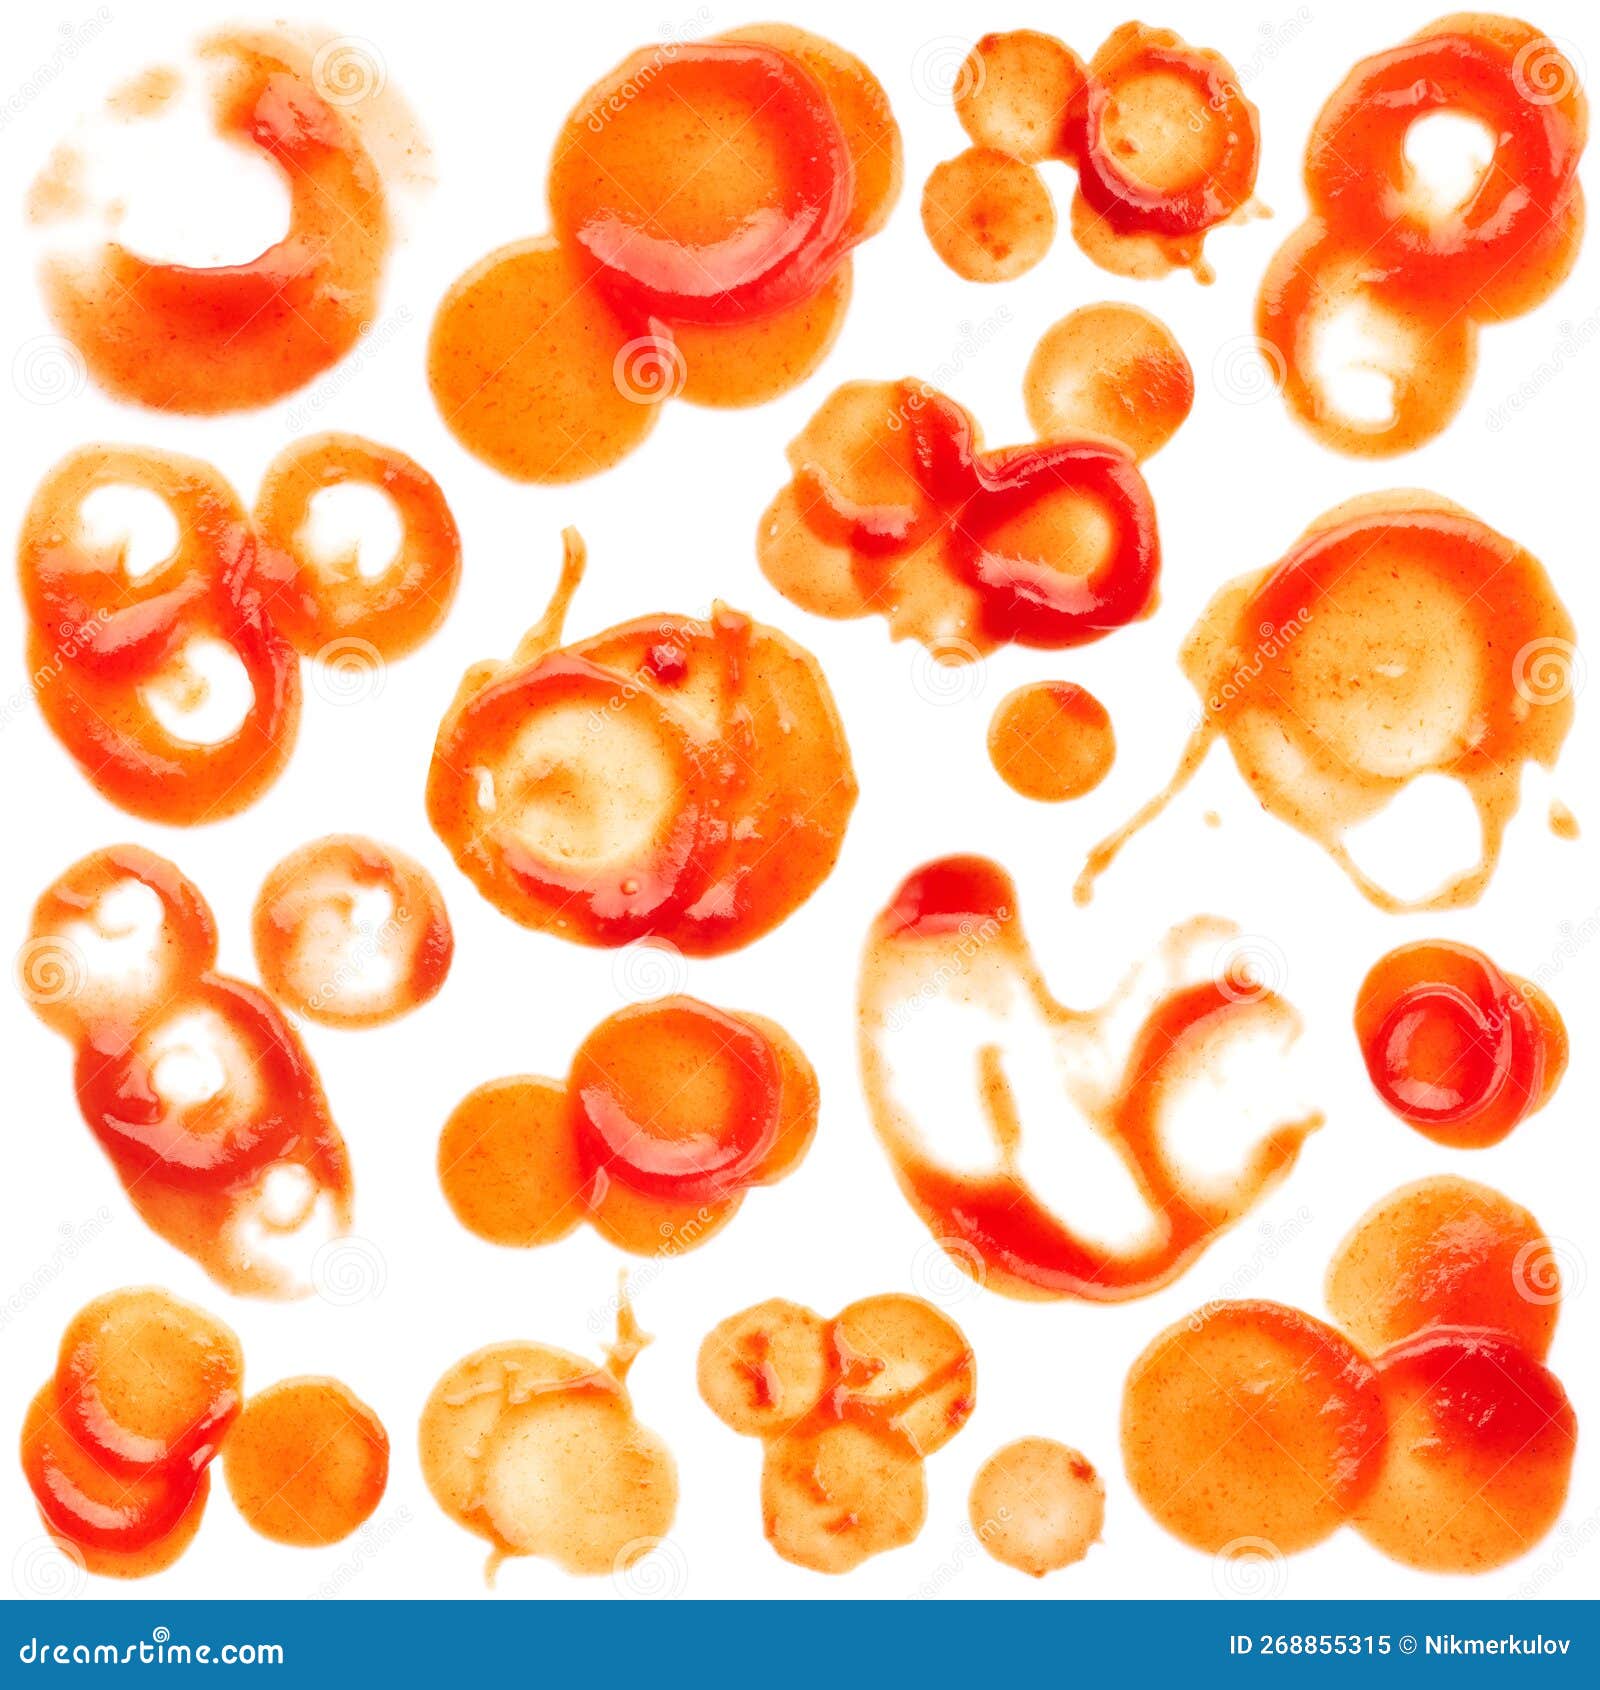 ketchup blots, stains, blemishes, drops on white